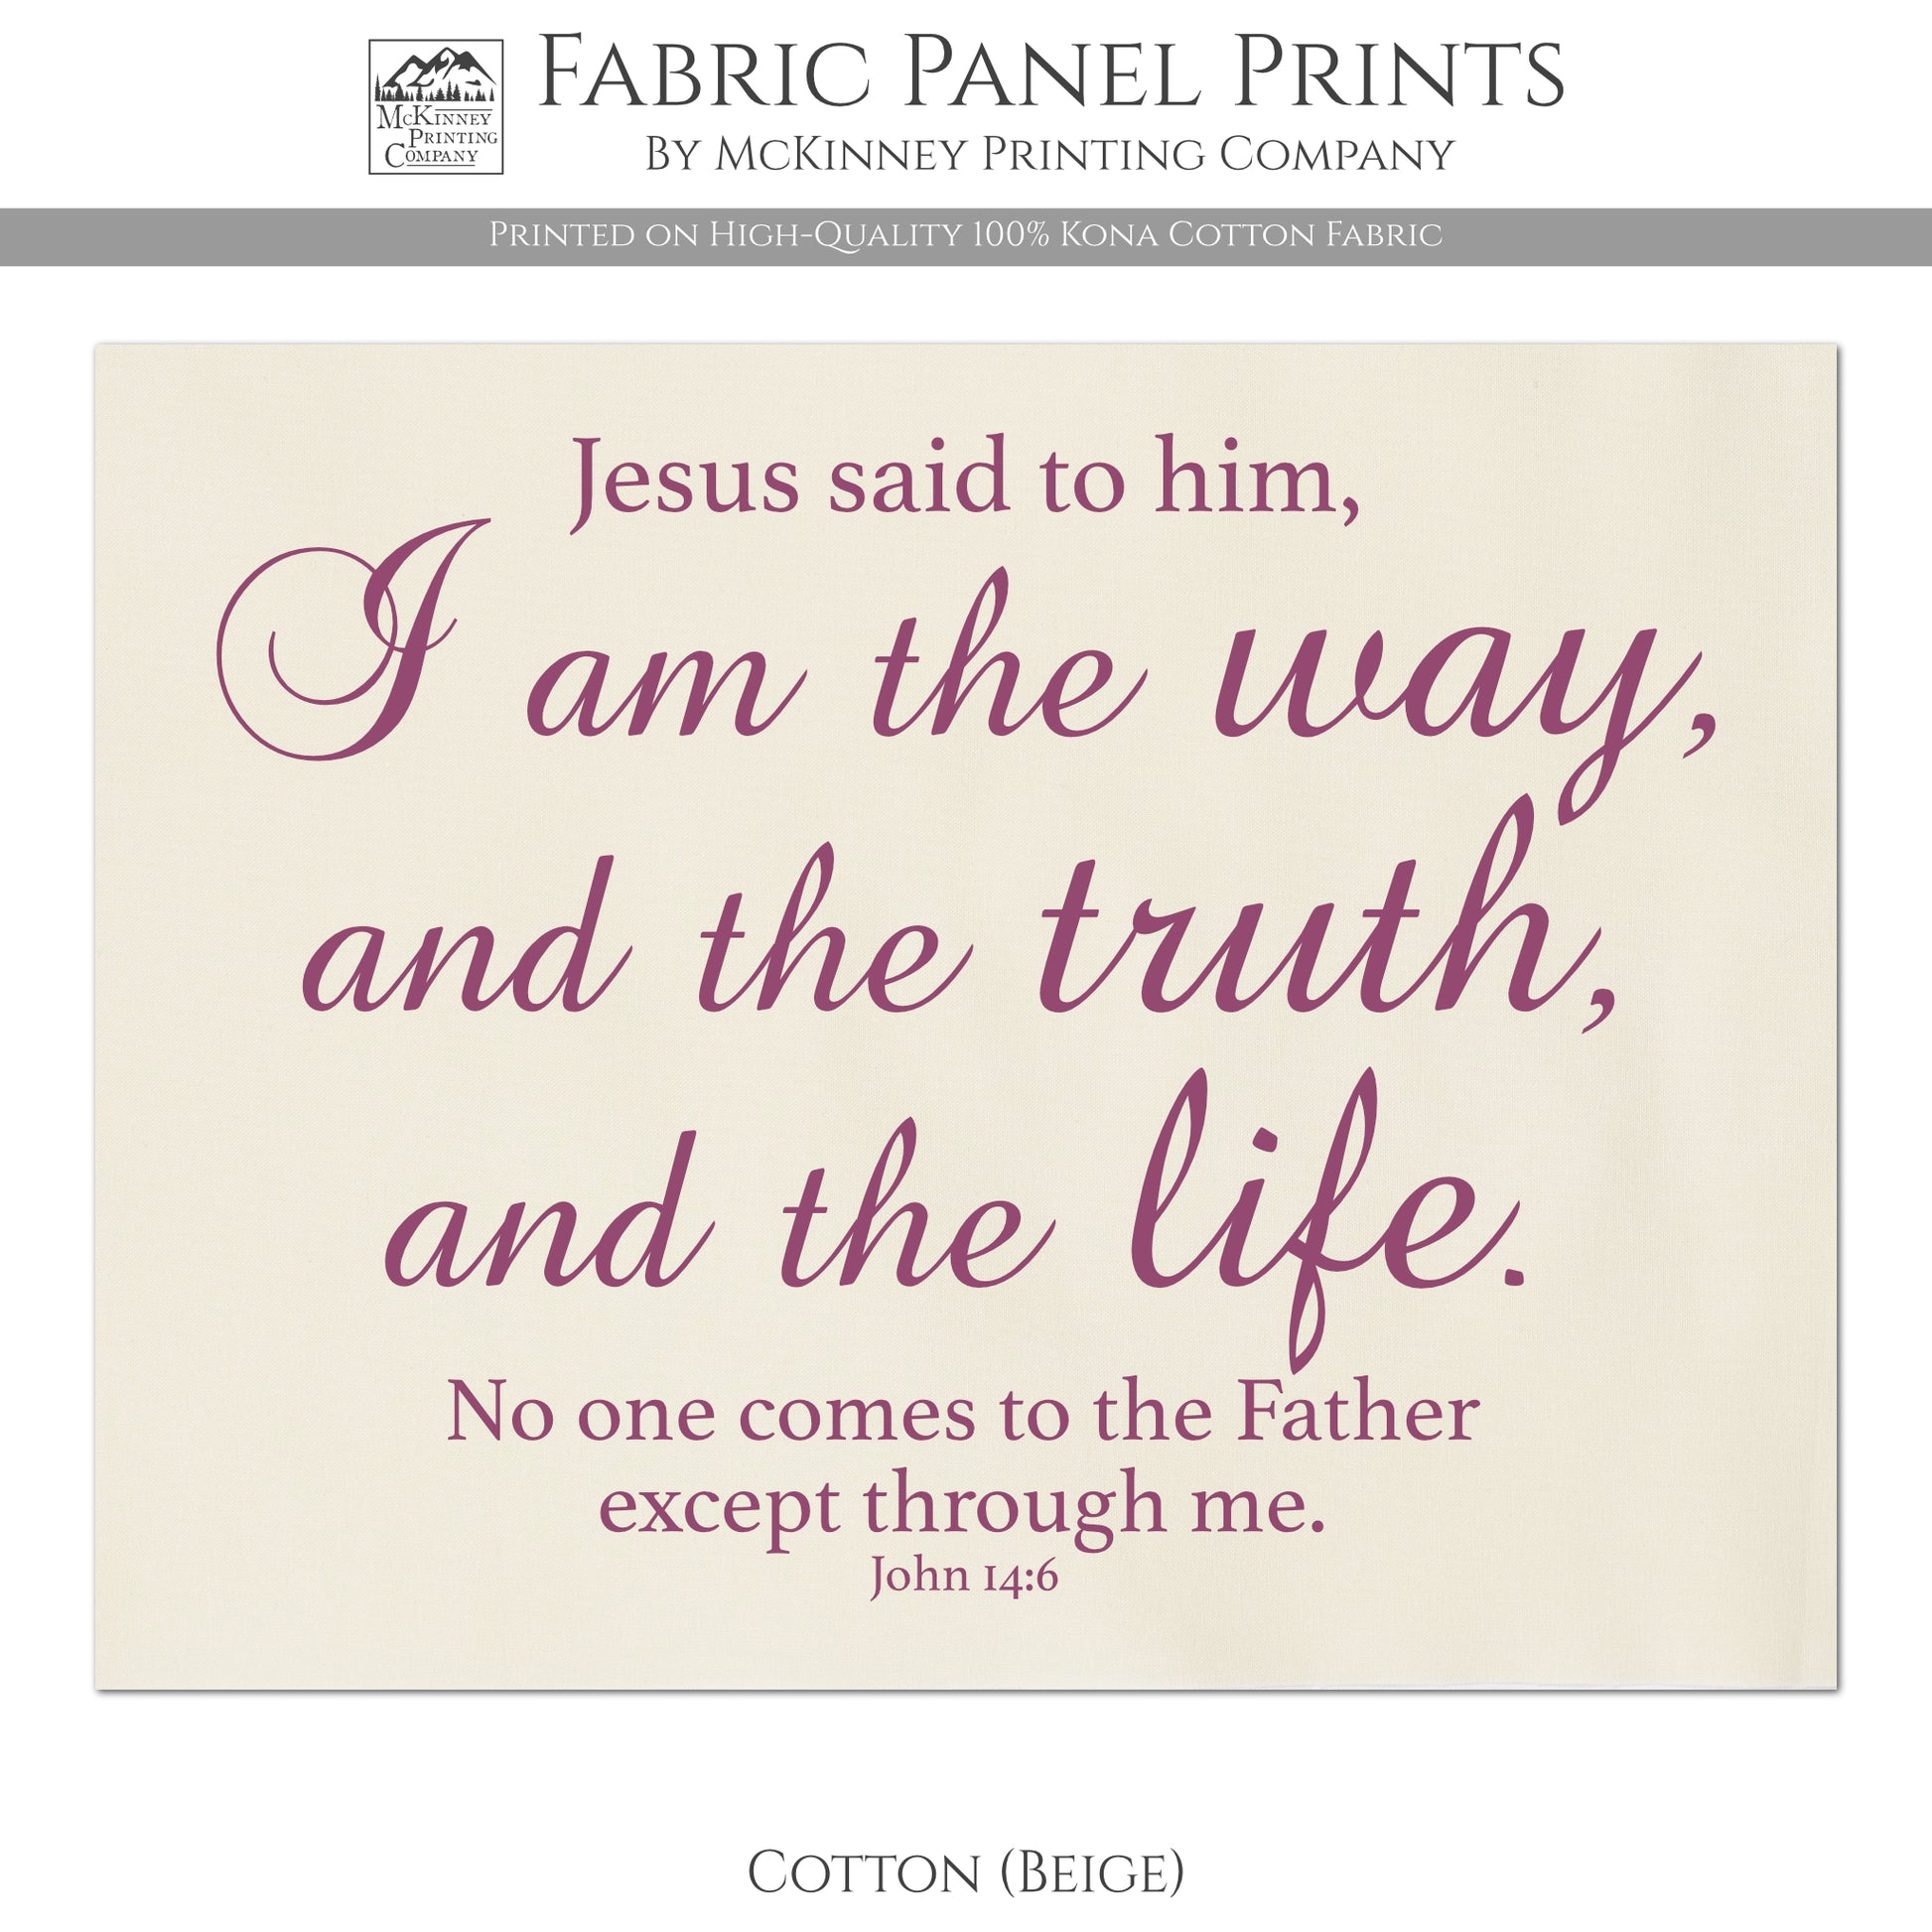 Jesus said to him, I am the way and the truth and the life. No one comes to the Father except through me. - John 14 6 - Fabric Panel Print, Quilt Block - Kona Cotton Fabric